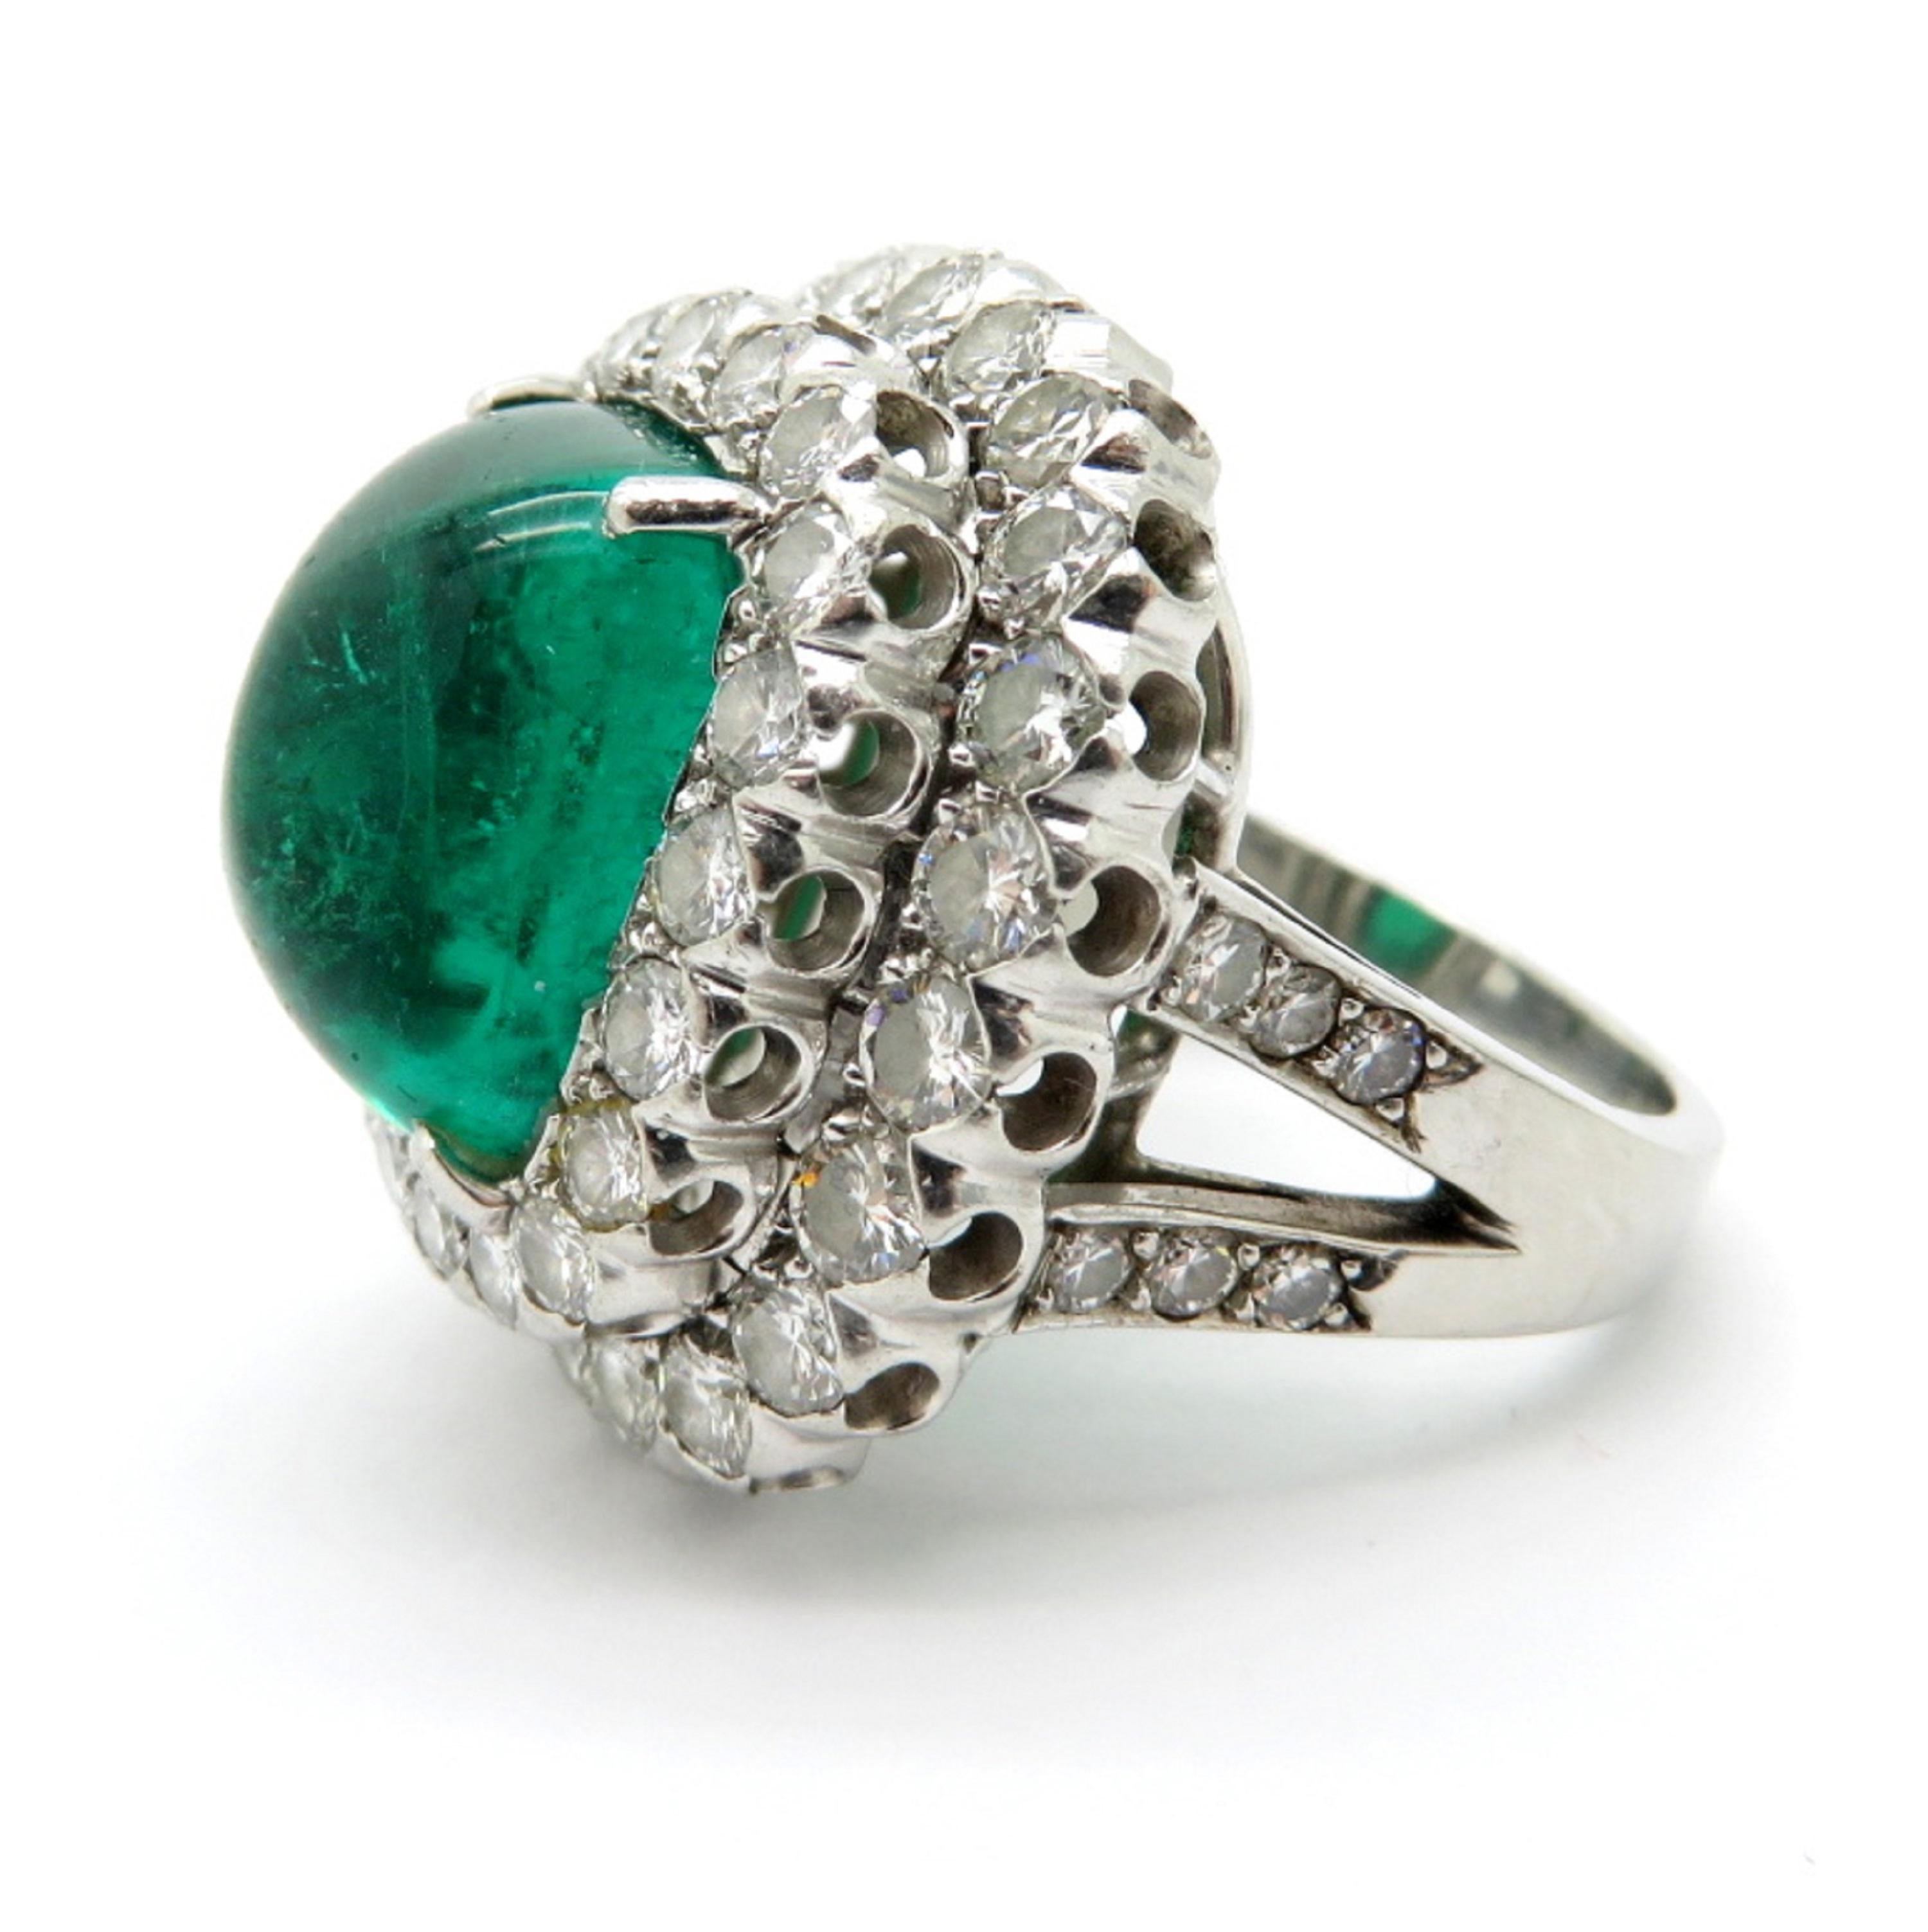 Designer Ruser AGL certified platinum large emerald and double halo diamond ring. Centering one 7.50 carat Sugarloaf emerald.  Interspersed with 43 round brilliant cut diamonds weighing a combined total of 3.00 carats. The diamonds are bead and